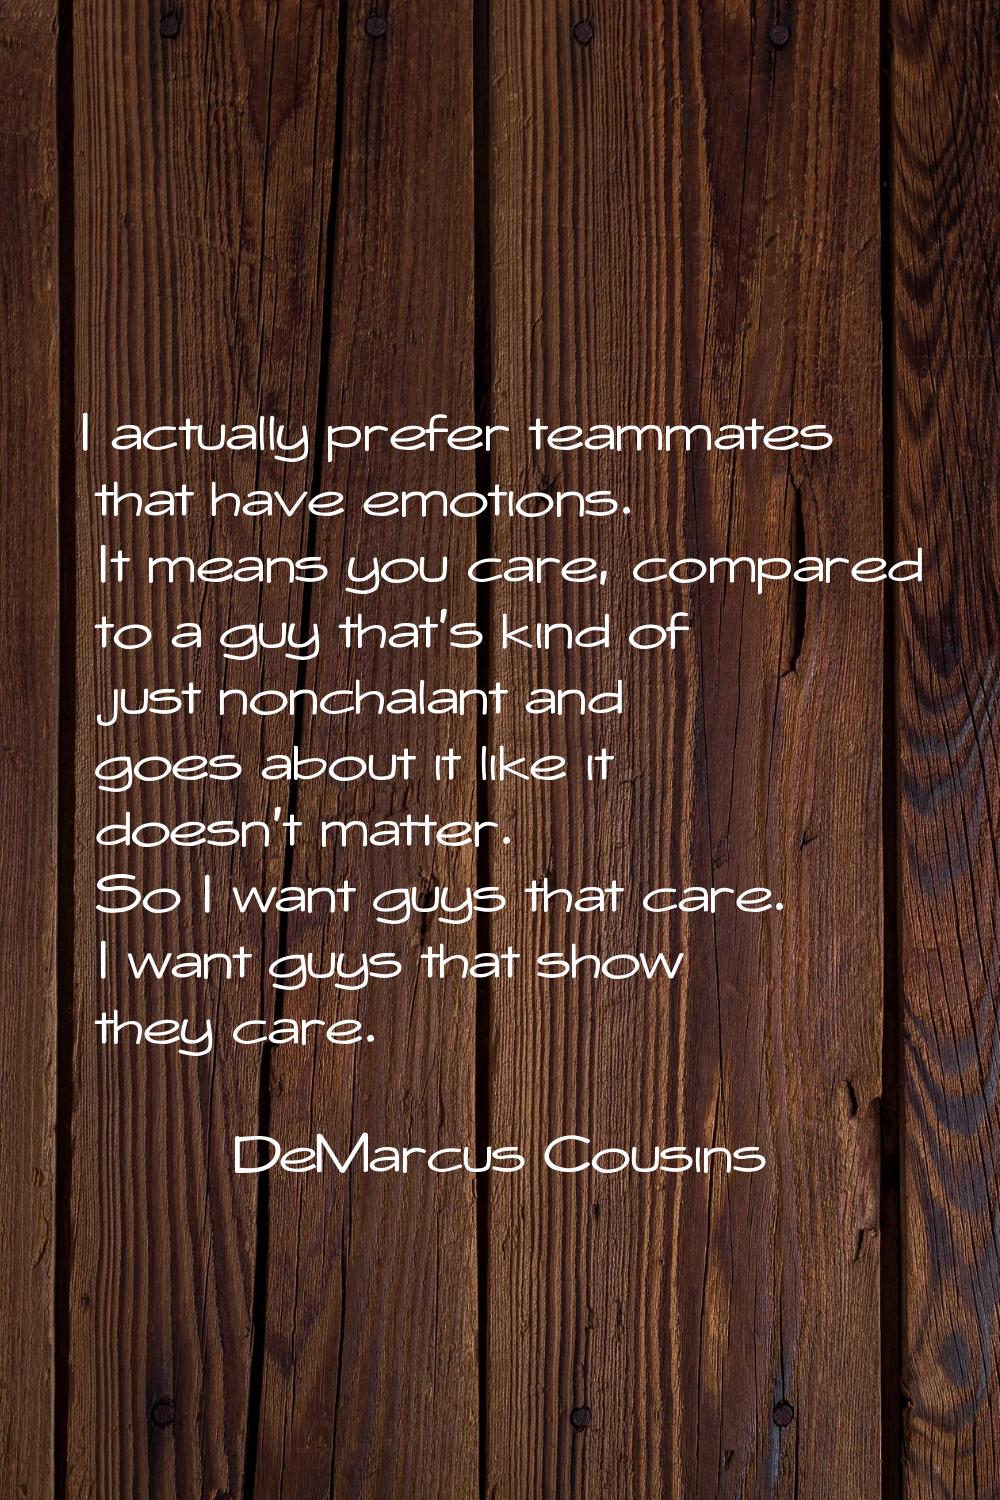 I actually prefer teammates that have emotions. It means you care, compared to a guy that's kind of